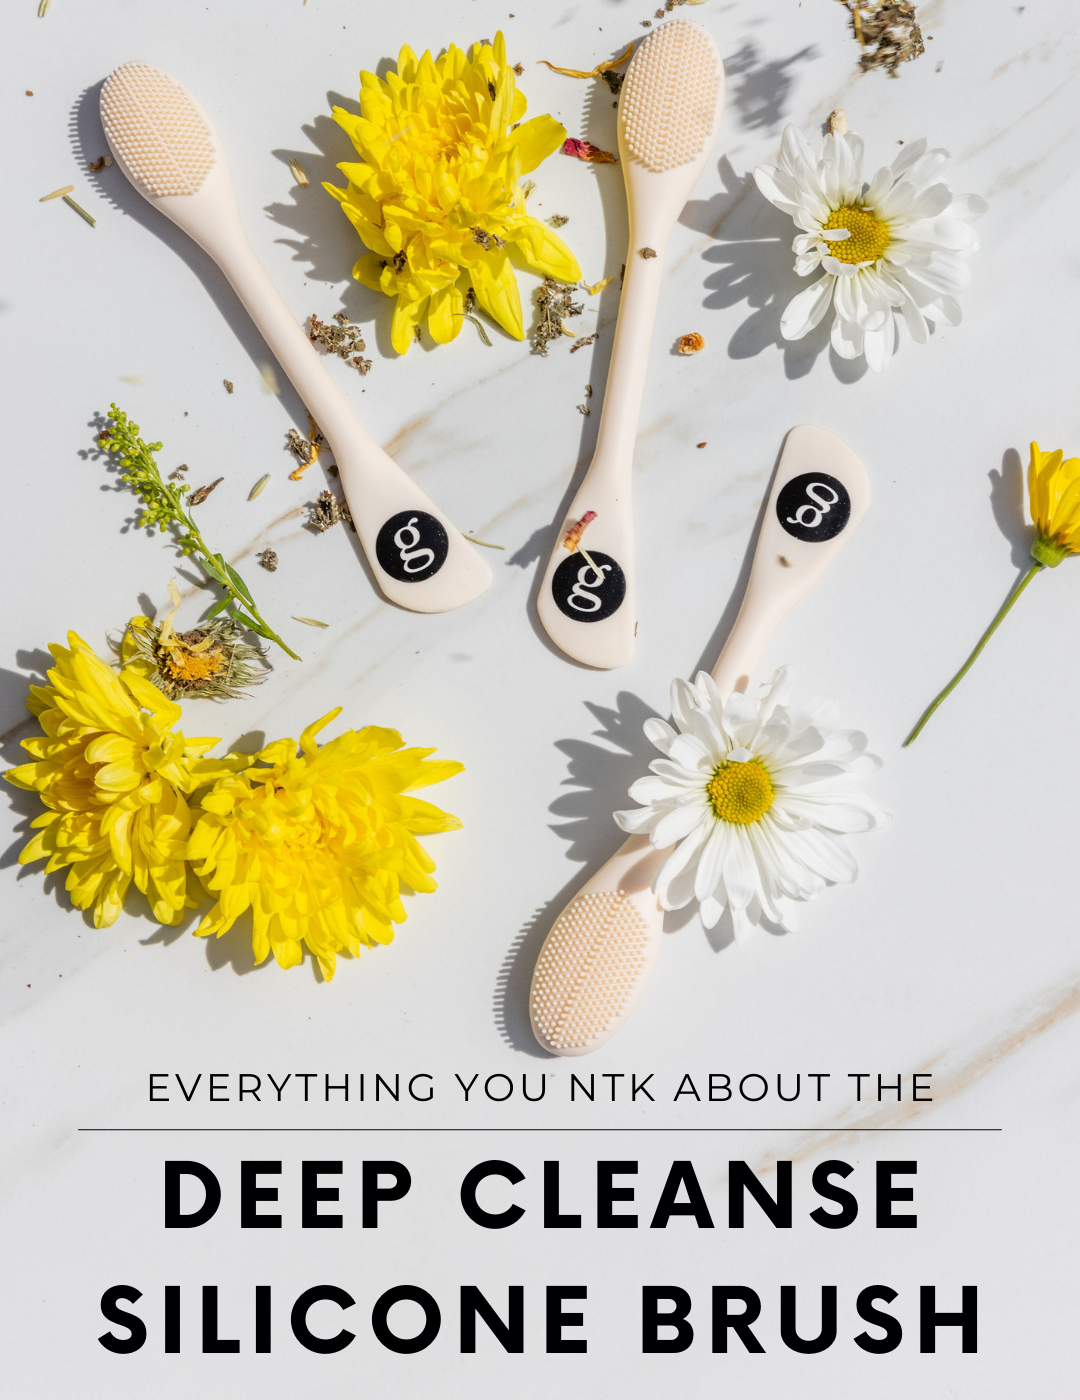 Everything you NTK about the Deep Cleanse Silicone Brush